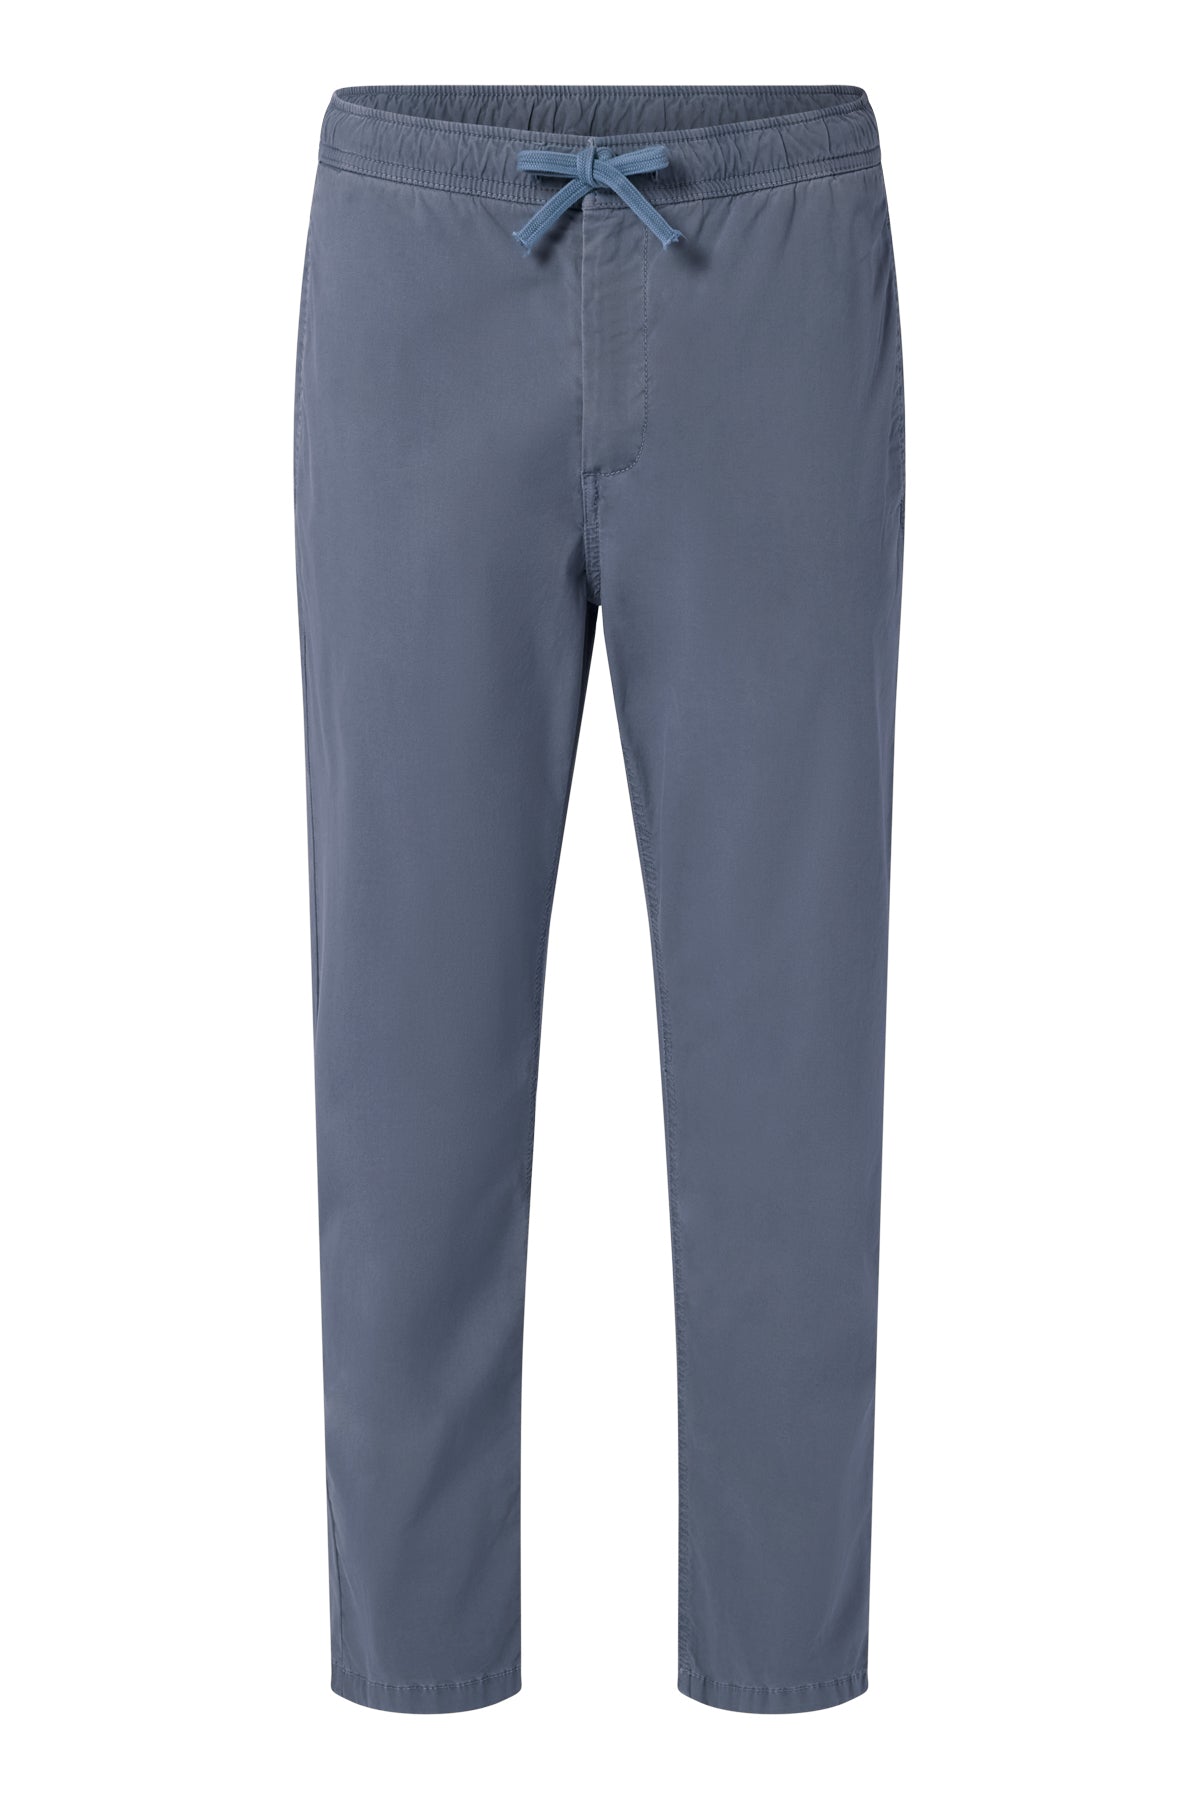 GREY ETHICA TROUSERS